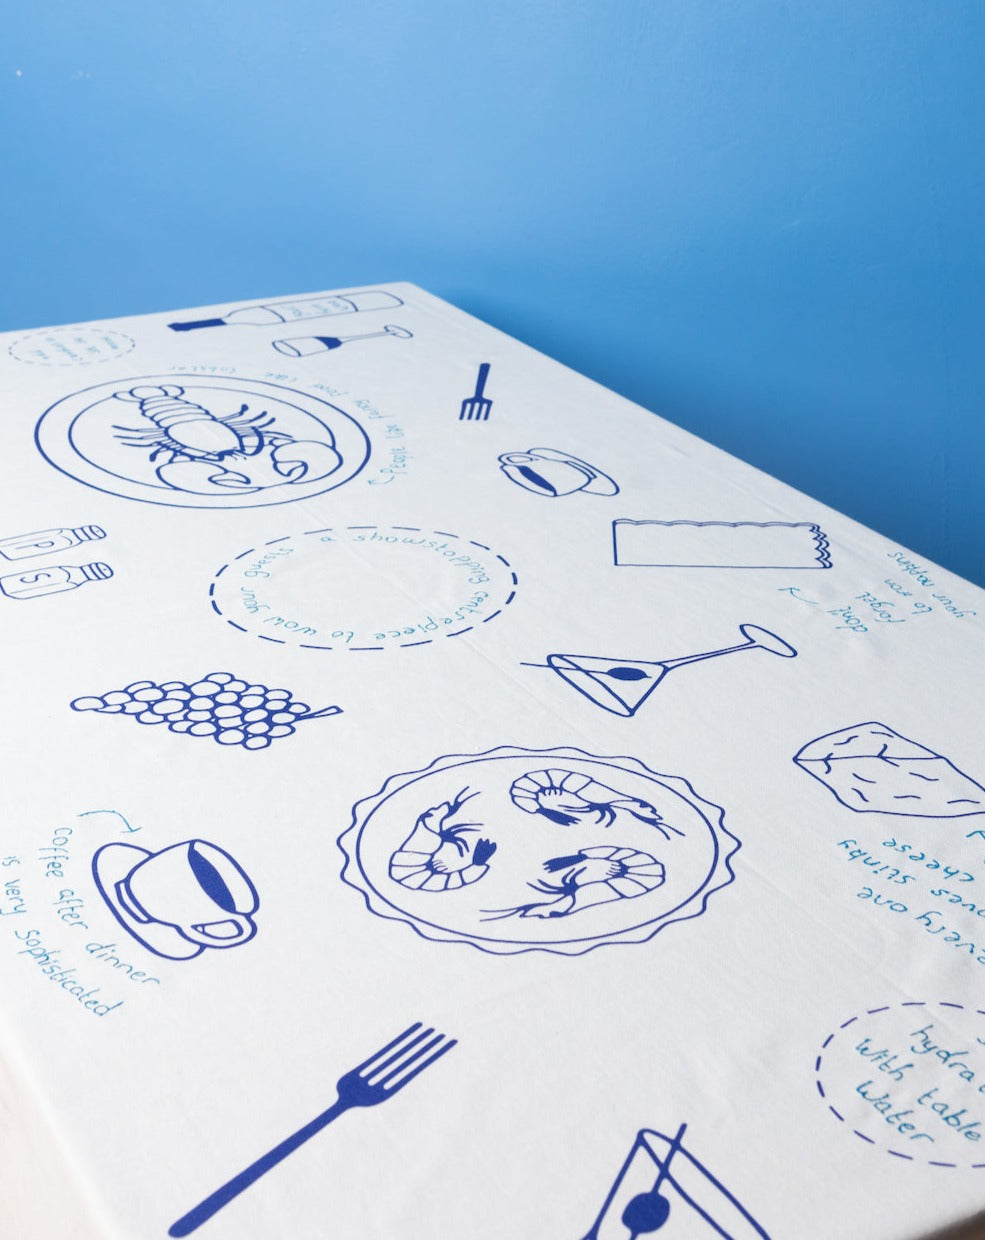 The &#39;How To Dinner Party&#39; Tablecloth